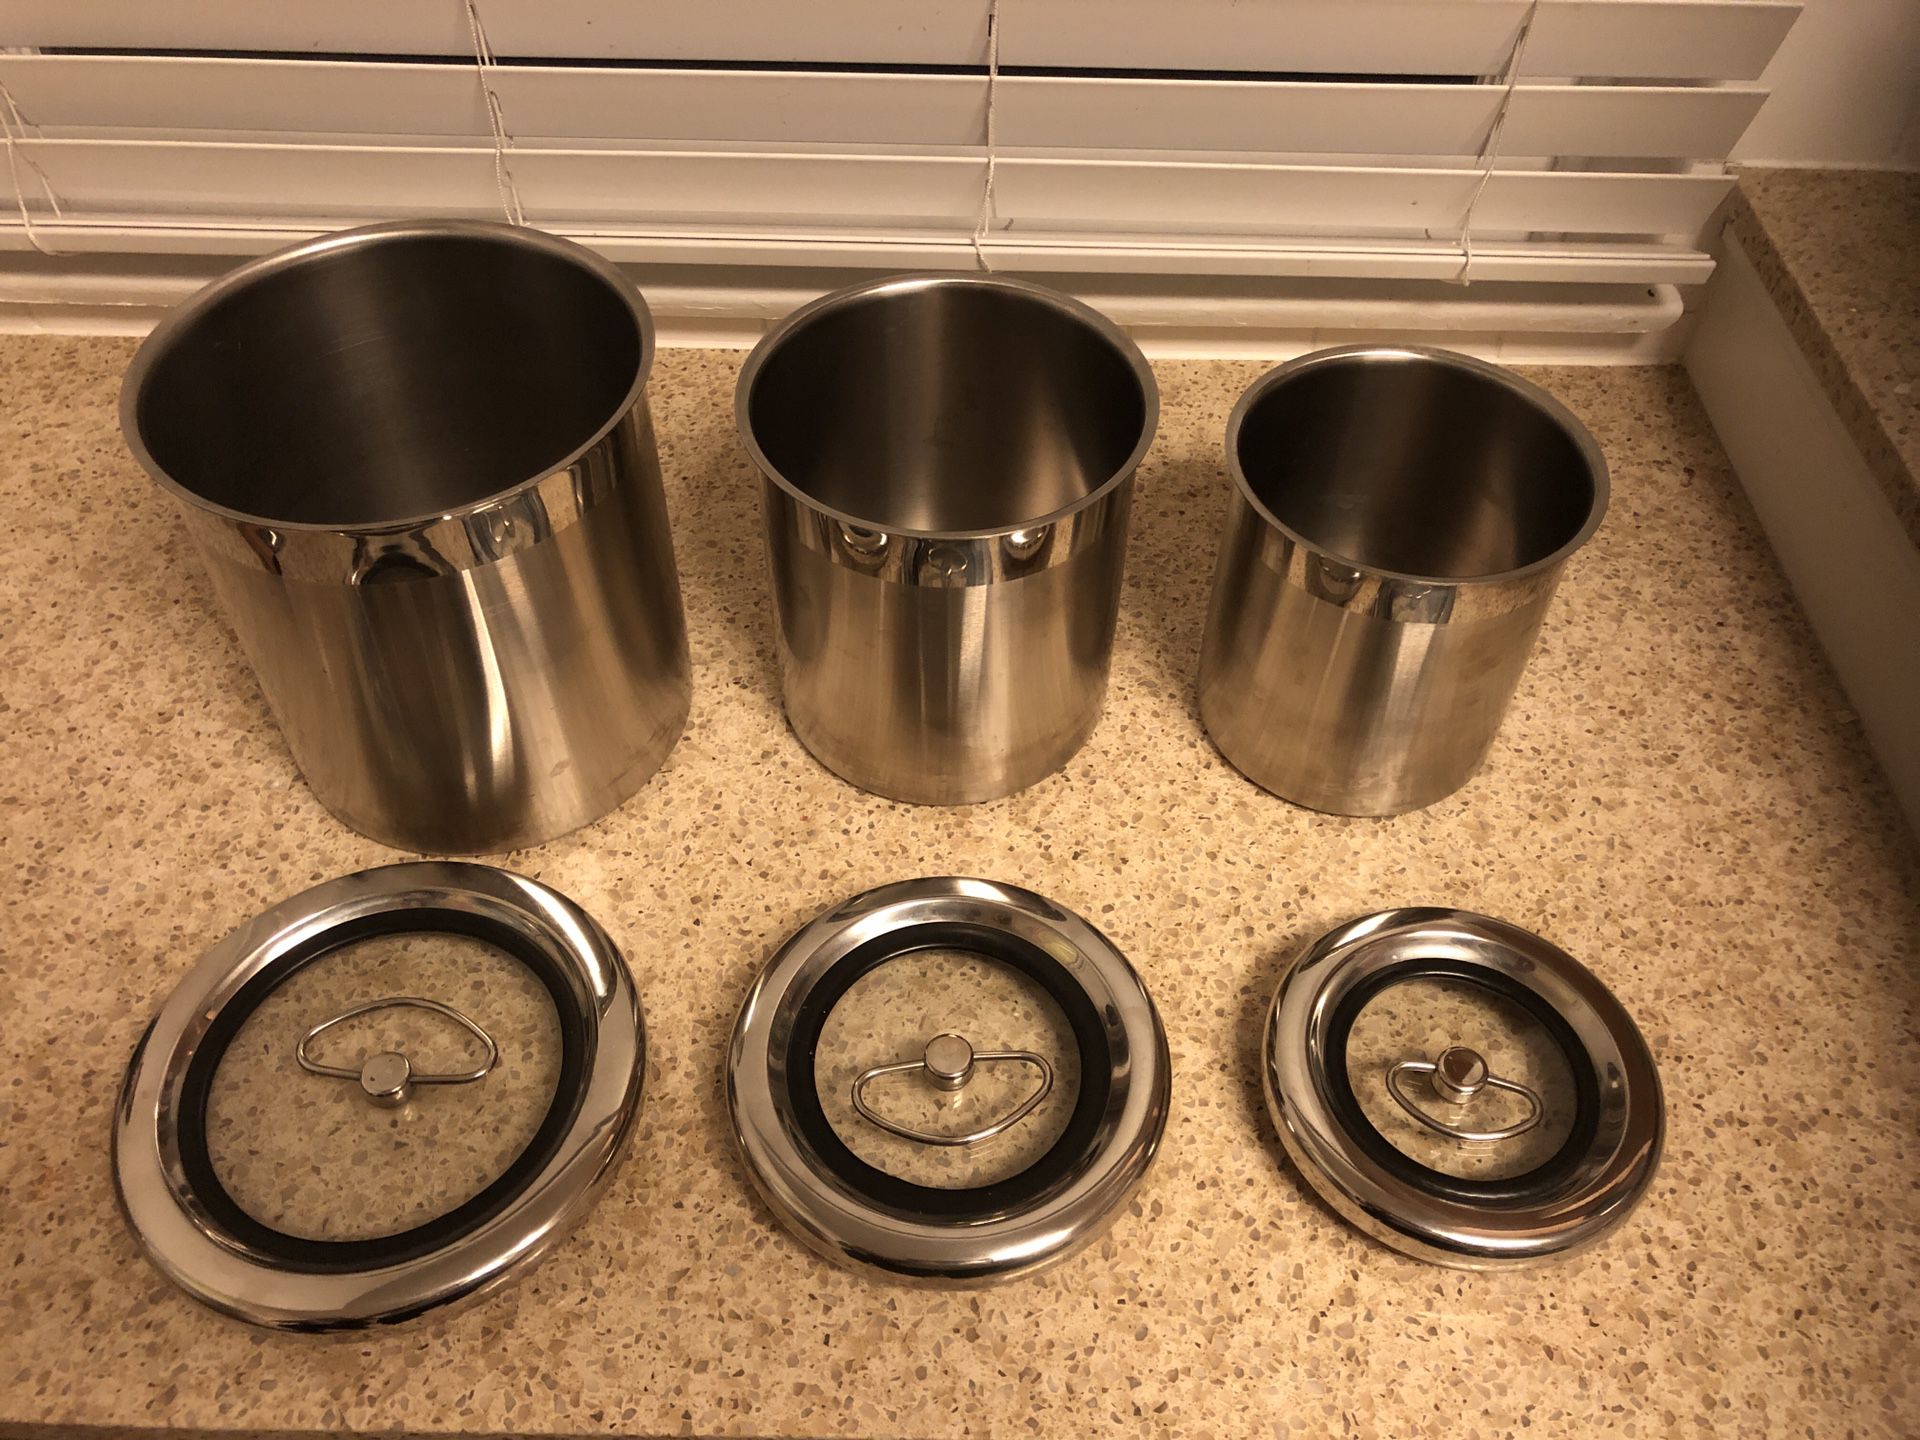 Stainless steel kitchen canisters